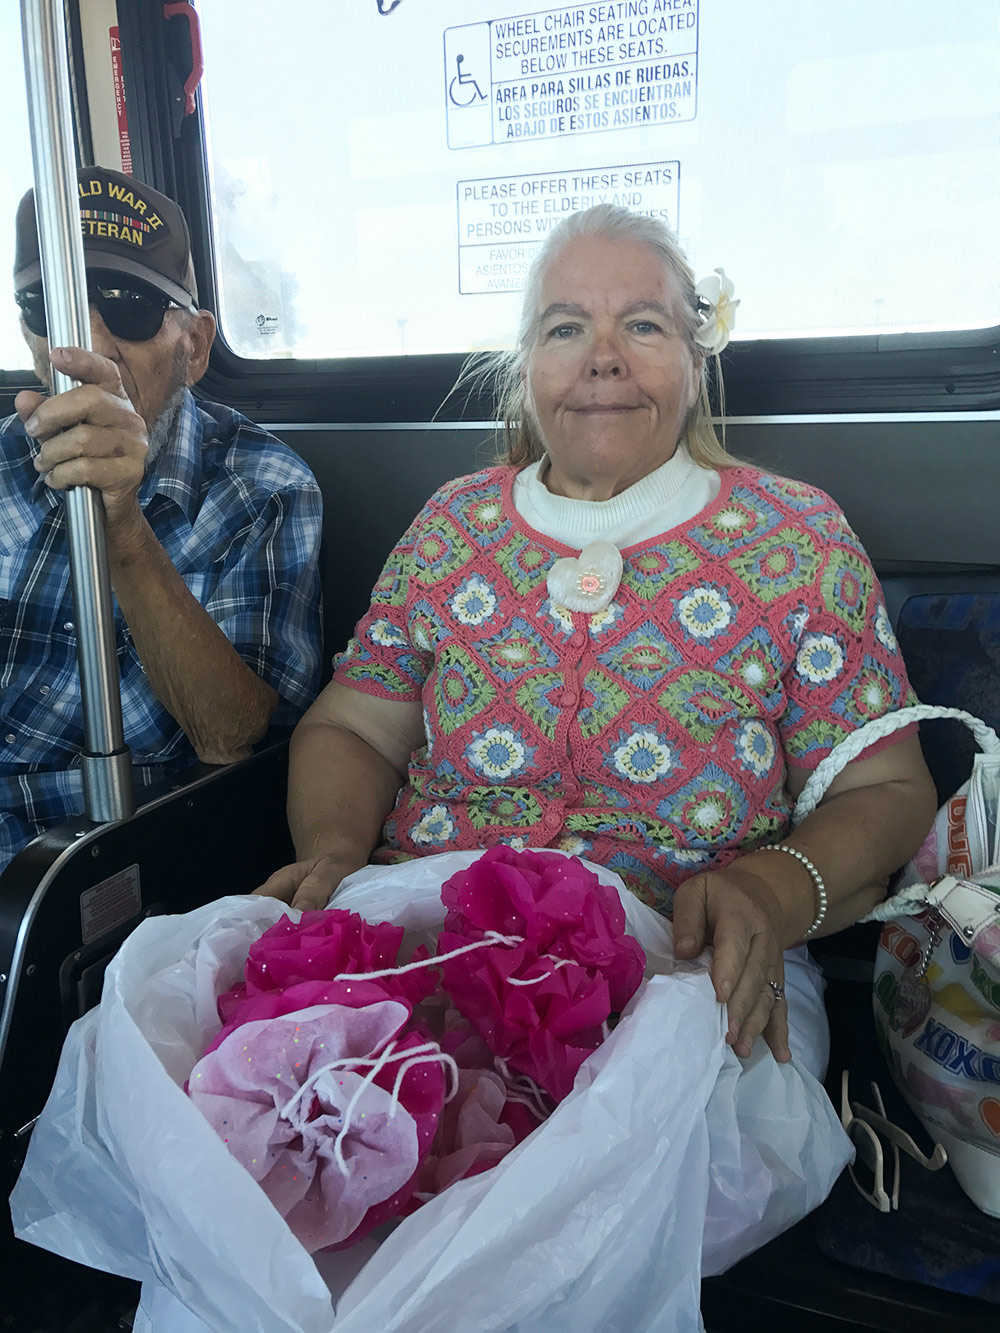 Showing flowers on the bus